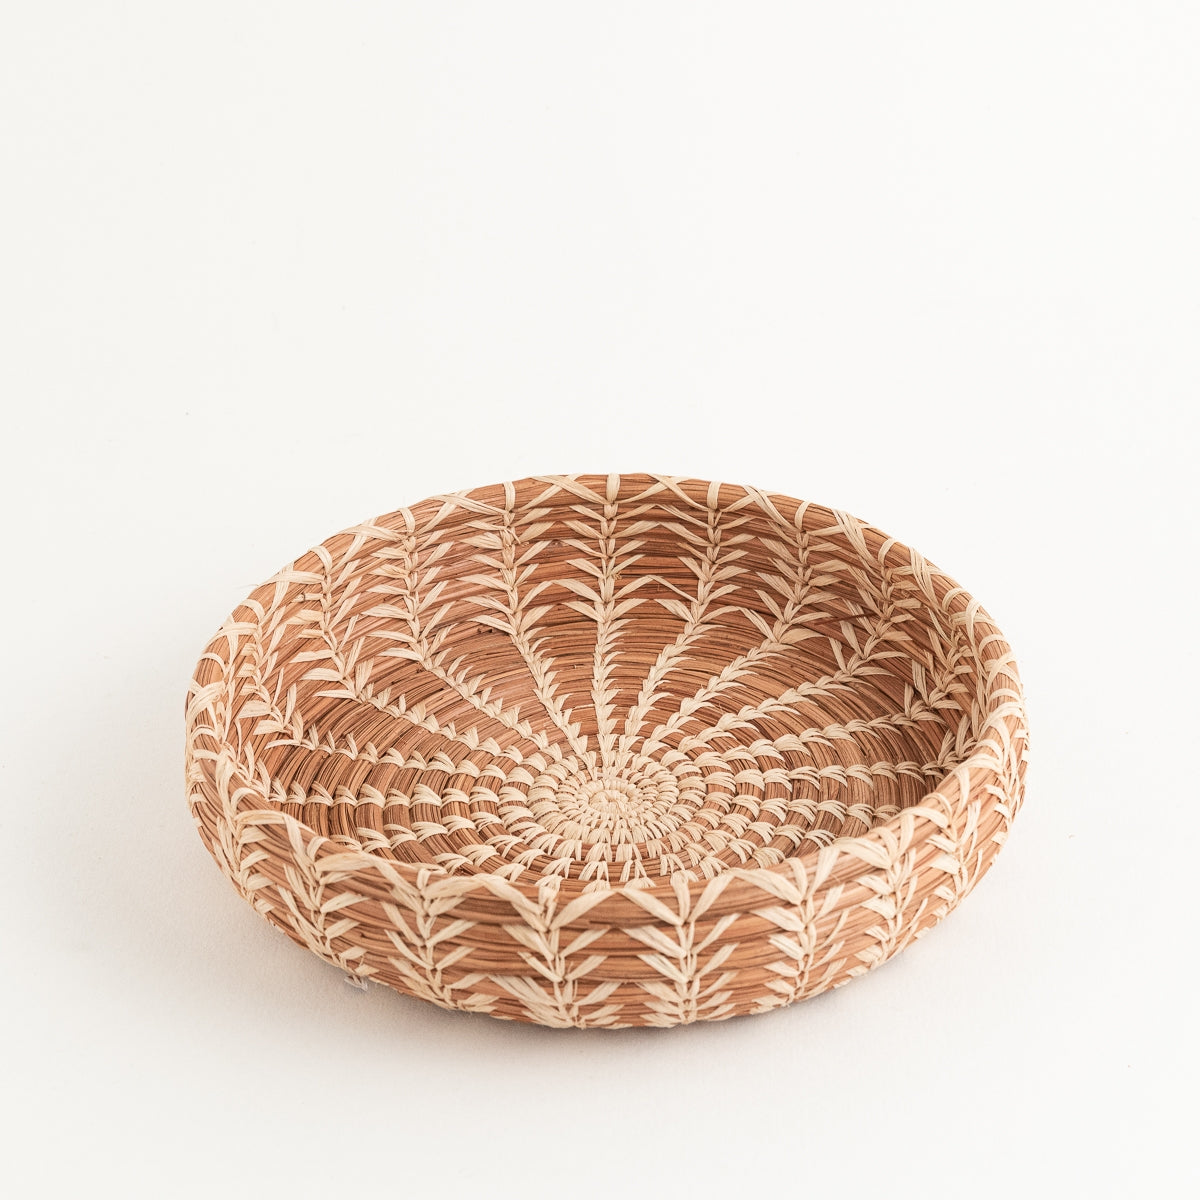 Handwoven Ceila Basket designed by Mayan Hands artisan partners in La Fe, this fragrant basket also enhances the lives of the women who created it.